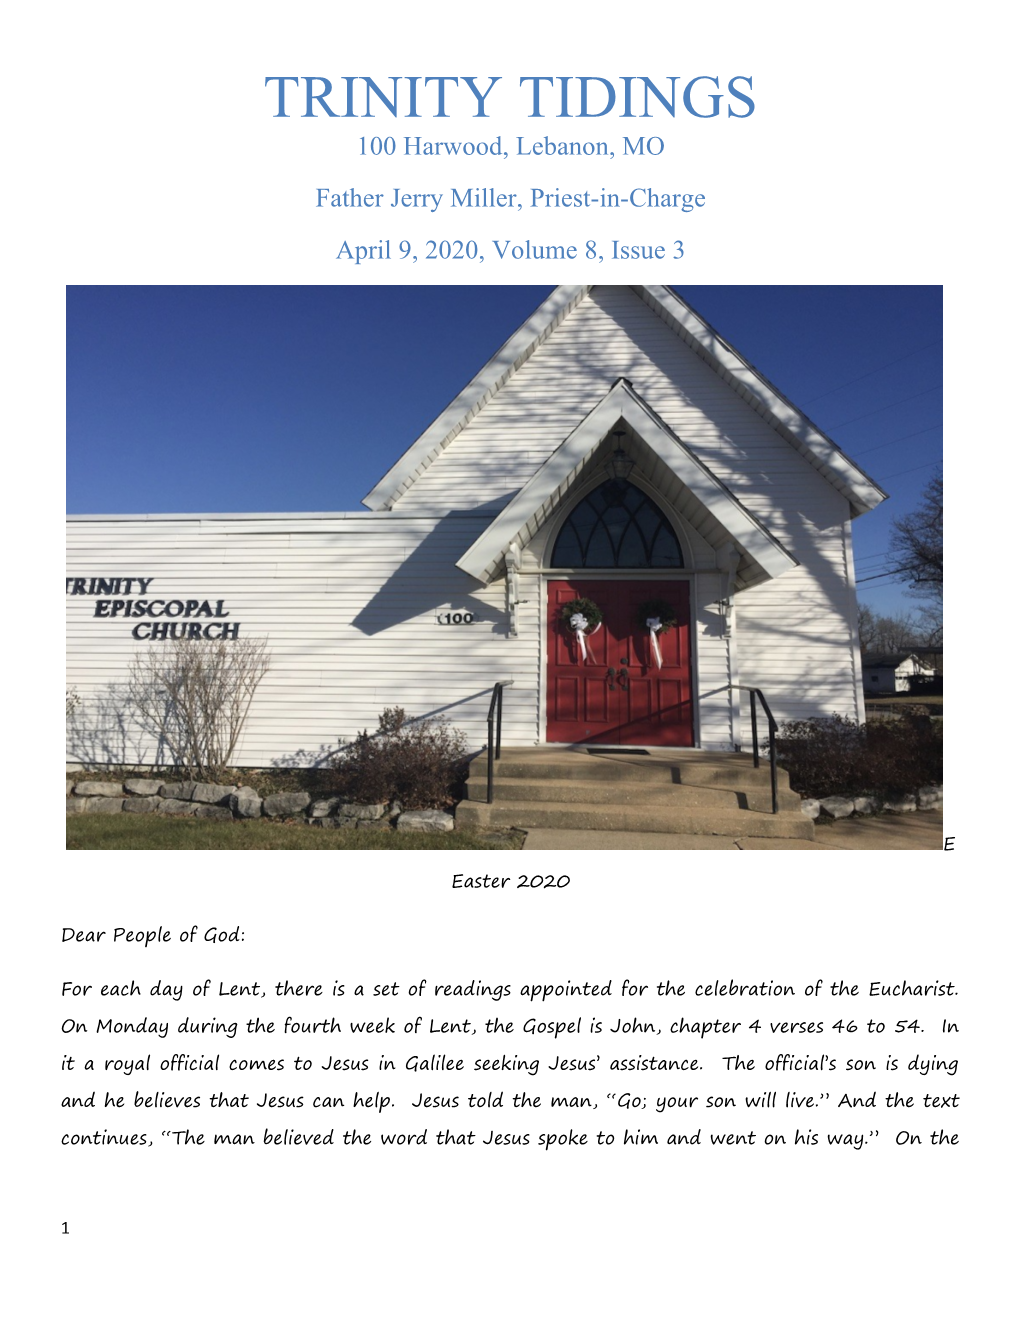 TRINITY TIDINGS 100 Harwood, Lebanon, MO Father Jerry Miller, Priest-In-Charge April 9, 2020, Volume 8, Issue 3